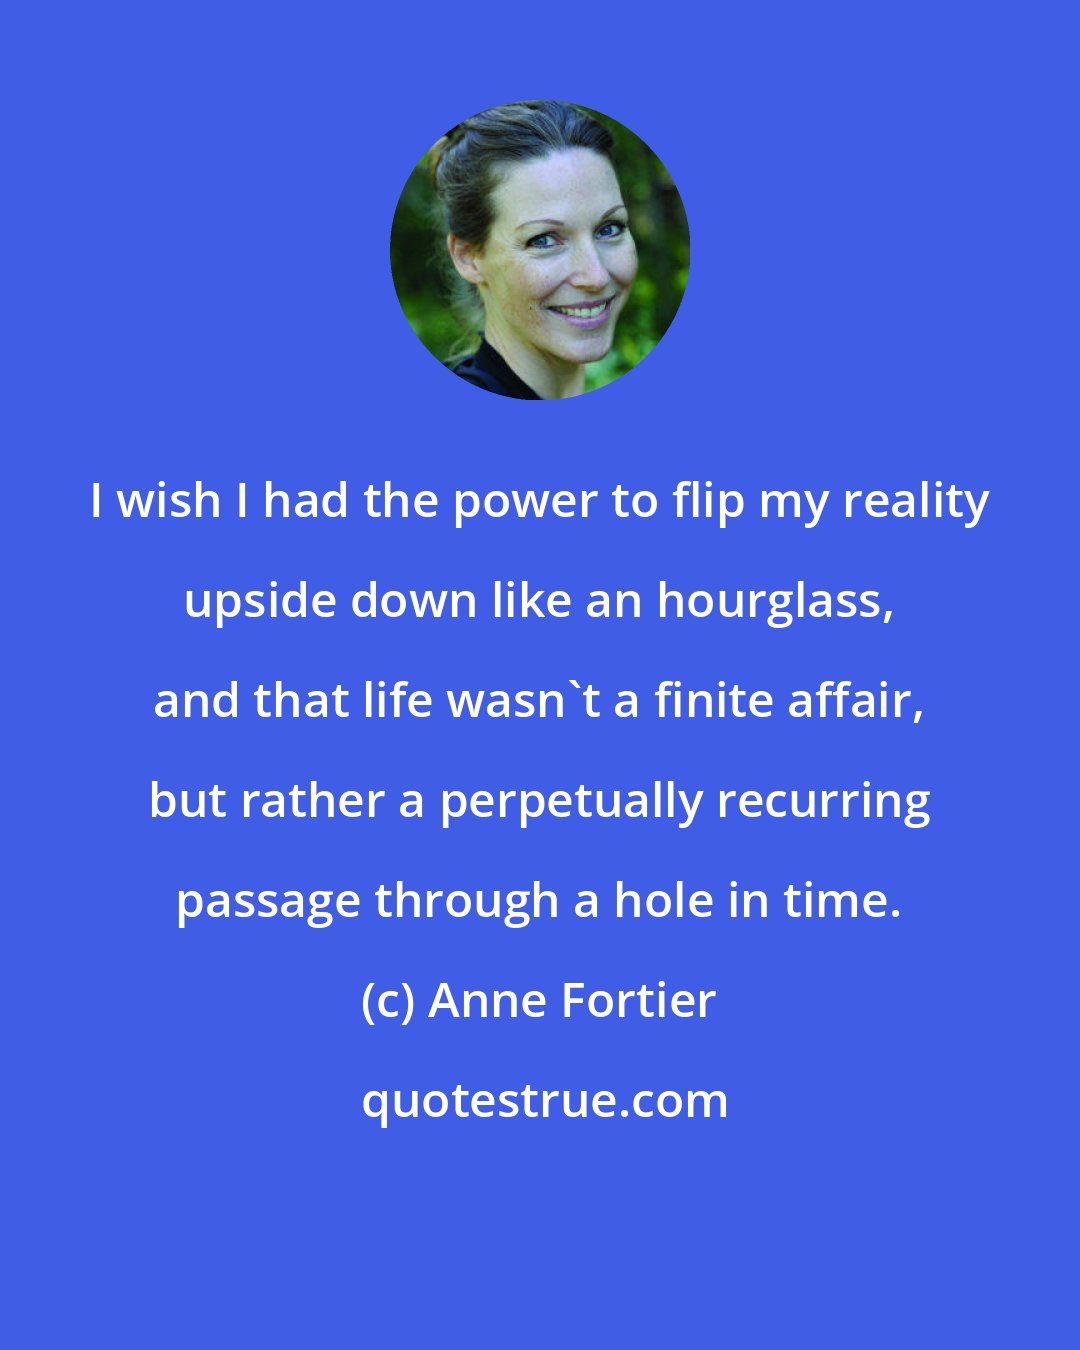 Anne Fortier: I wish I had the power to flip my reality upside down like an hourglass, and that life wasn't a finite affair, but rather a perpetually recurring passage through a hole in time.